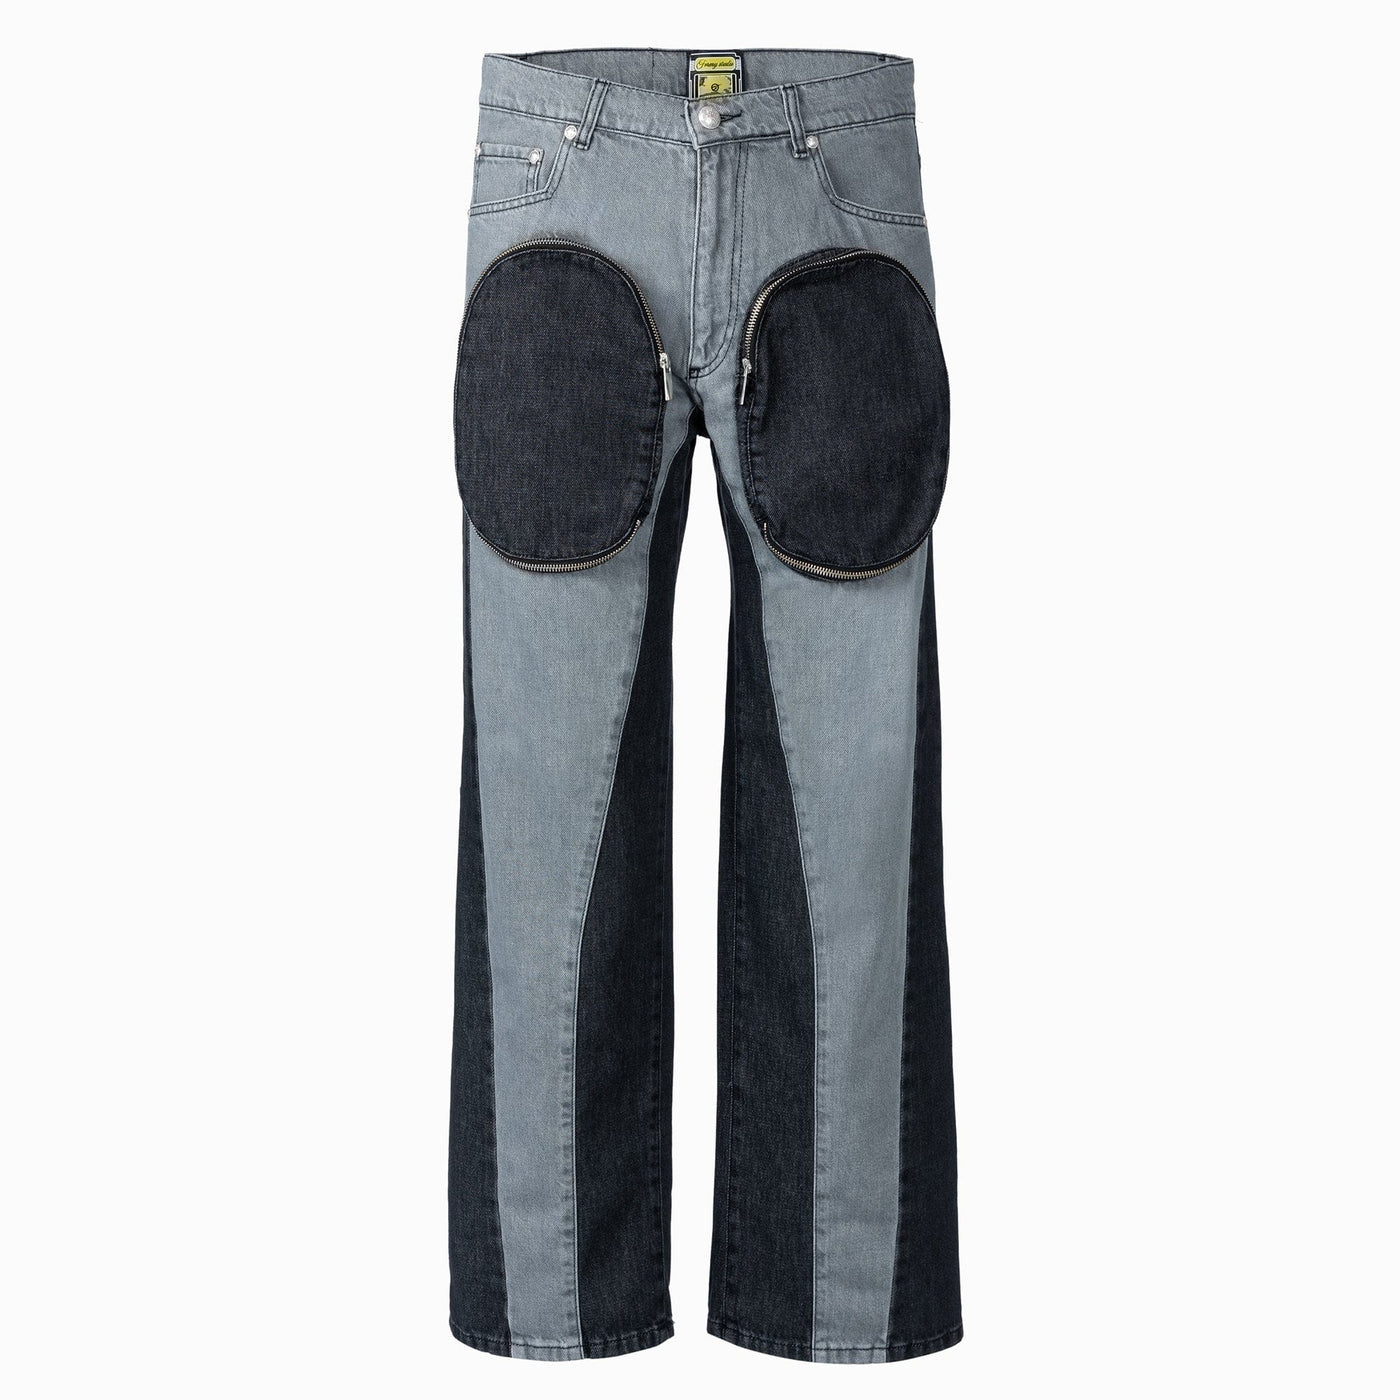 Formy Studio Two Packs Pant